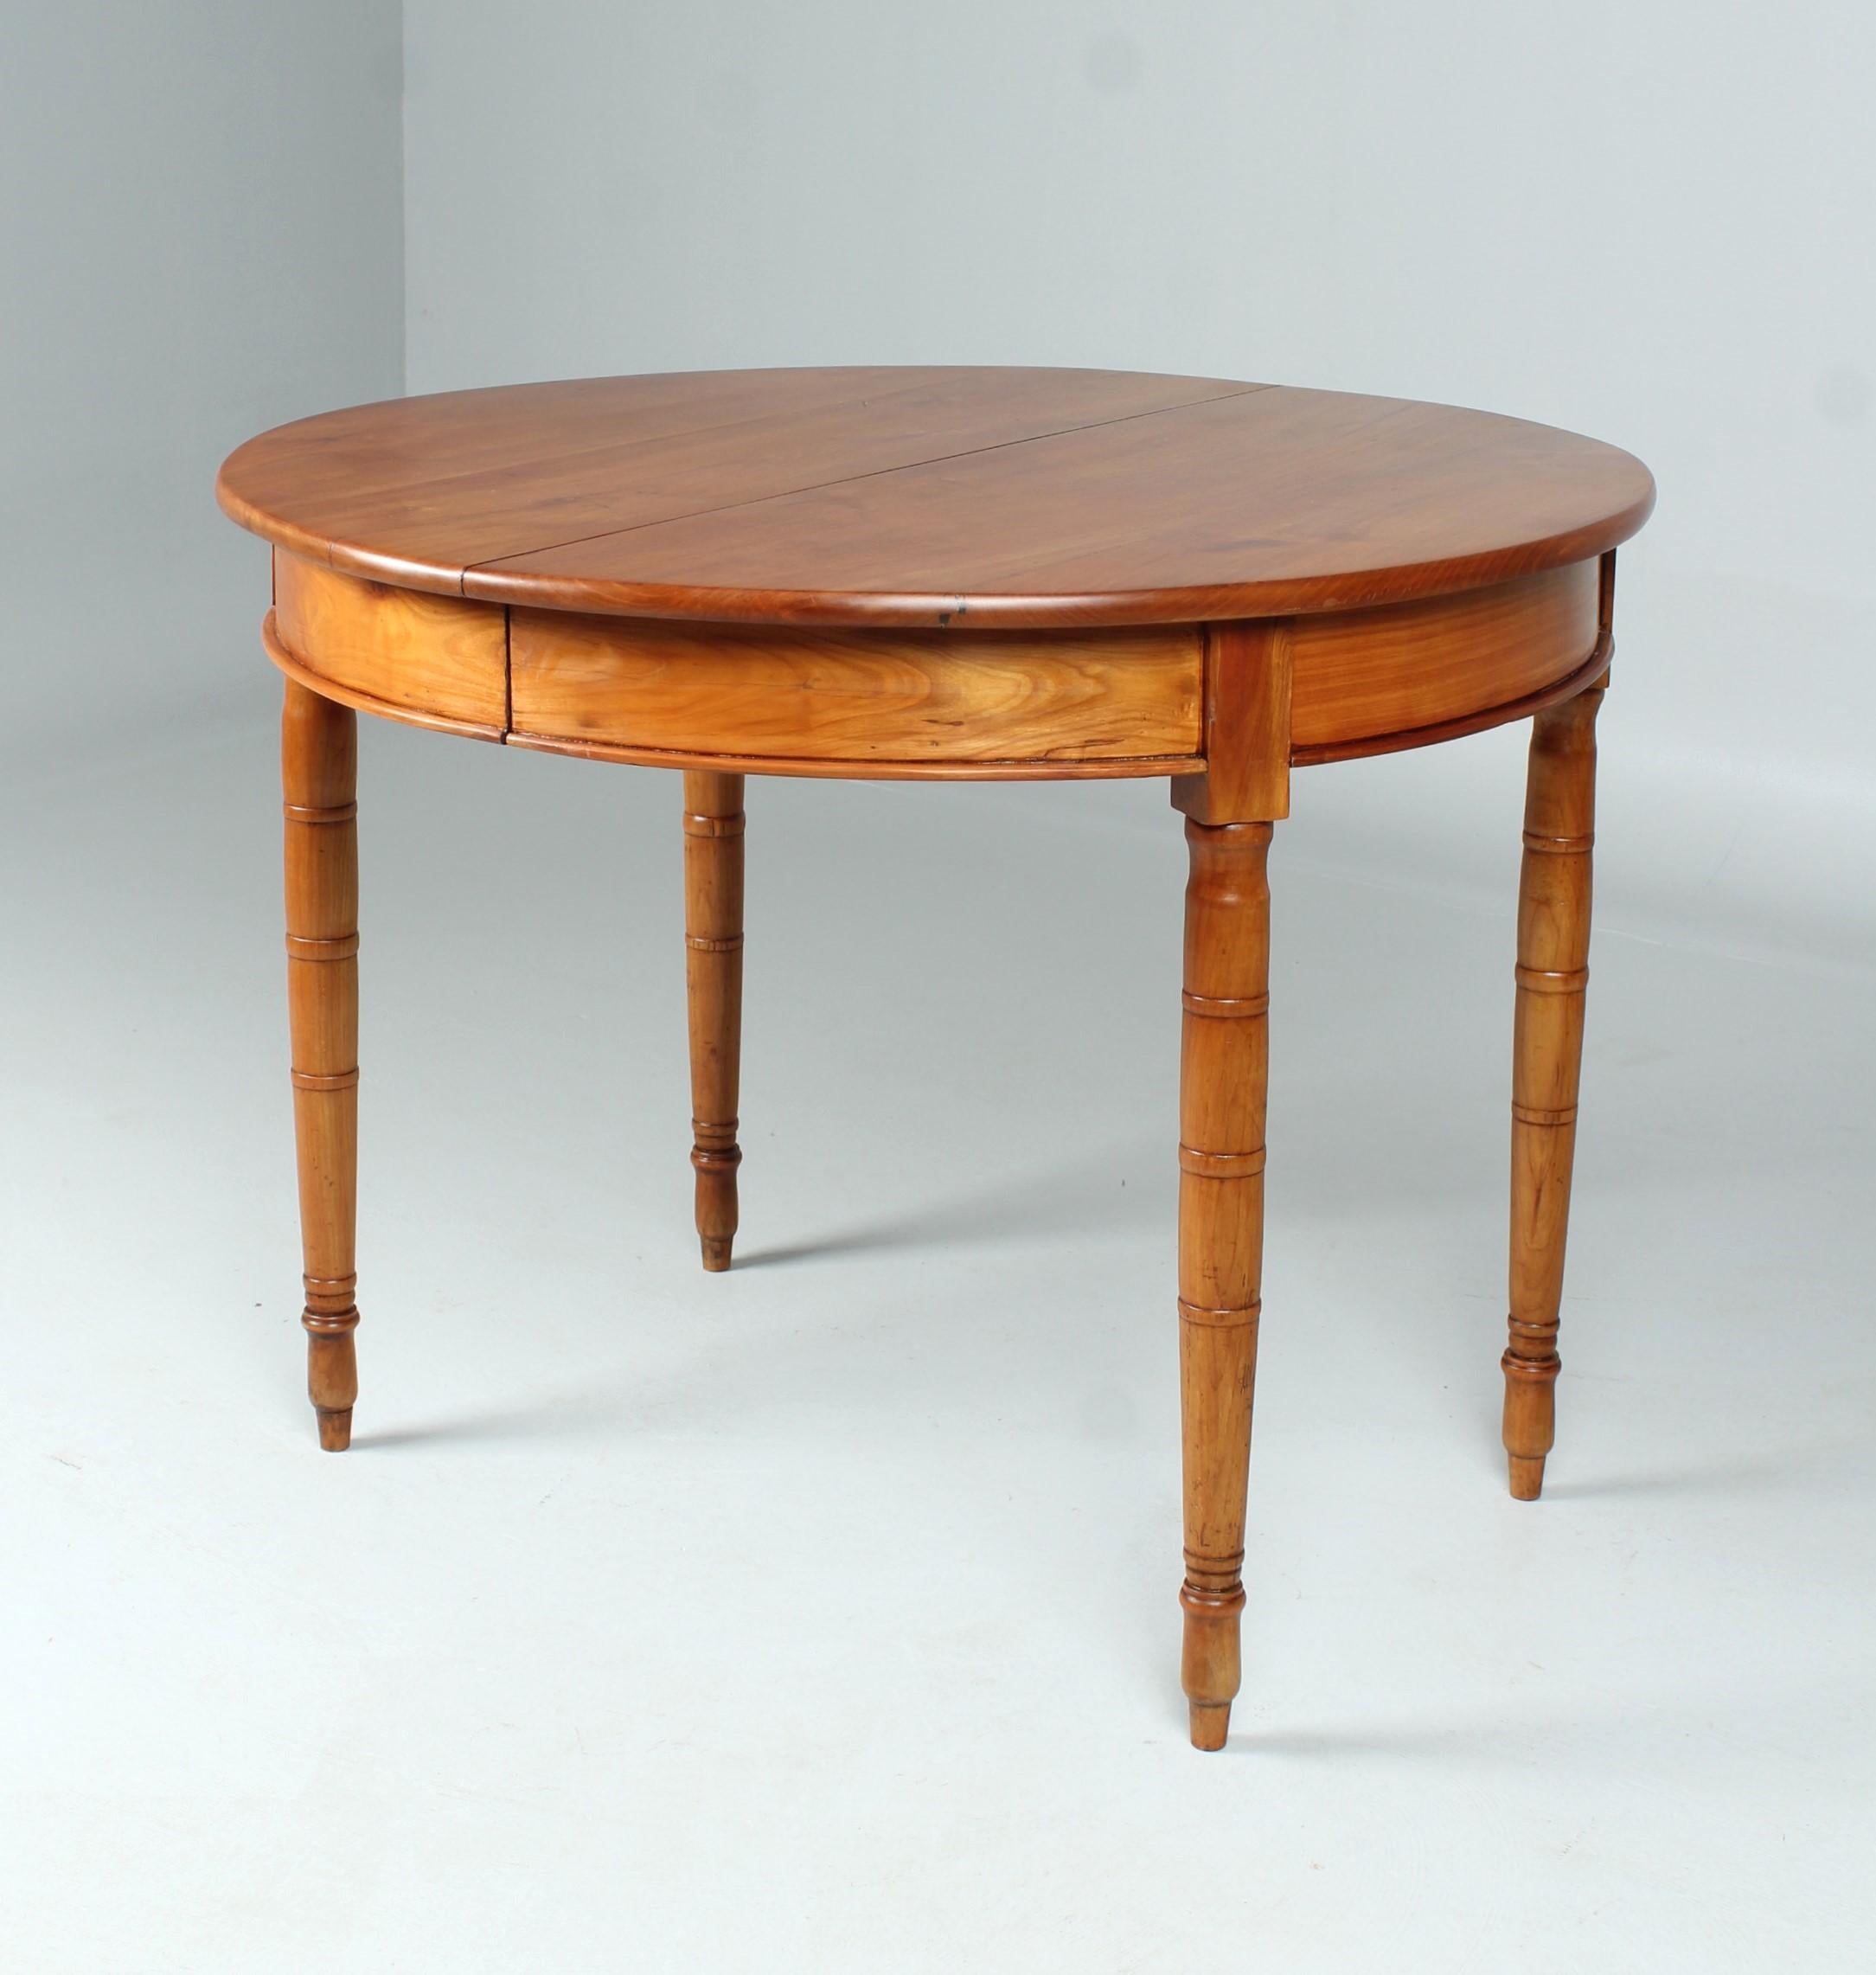 Extendable Cherrywood Dining Table, Germany, Mid 19th Century For Sale 5